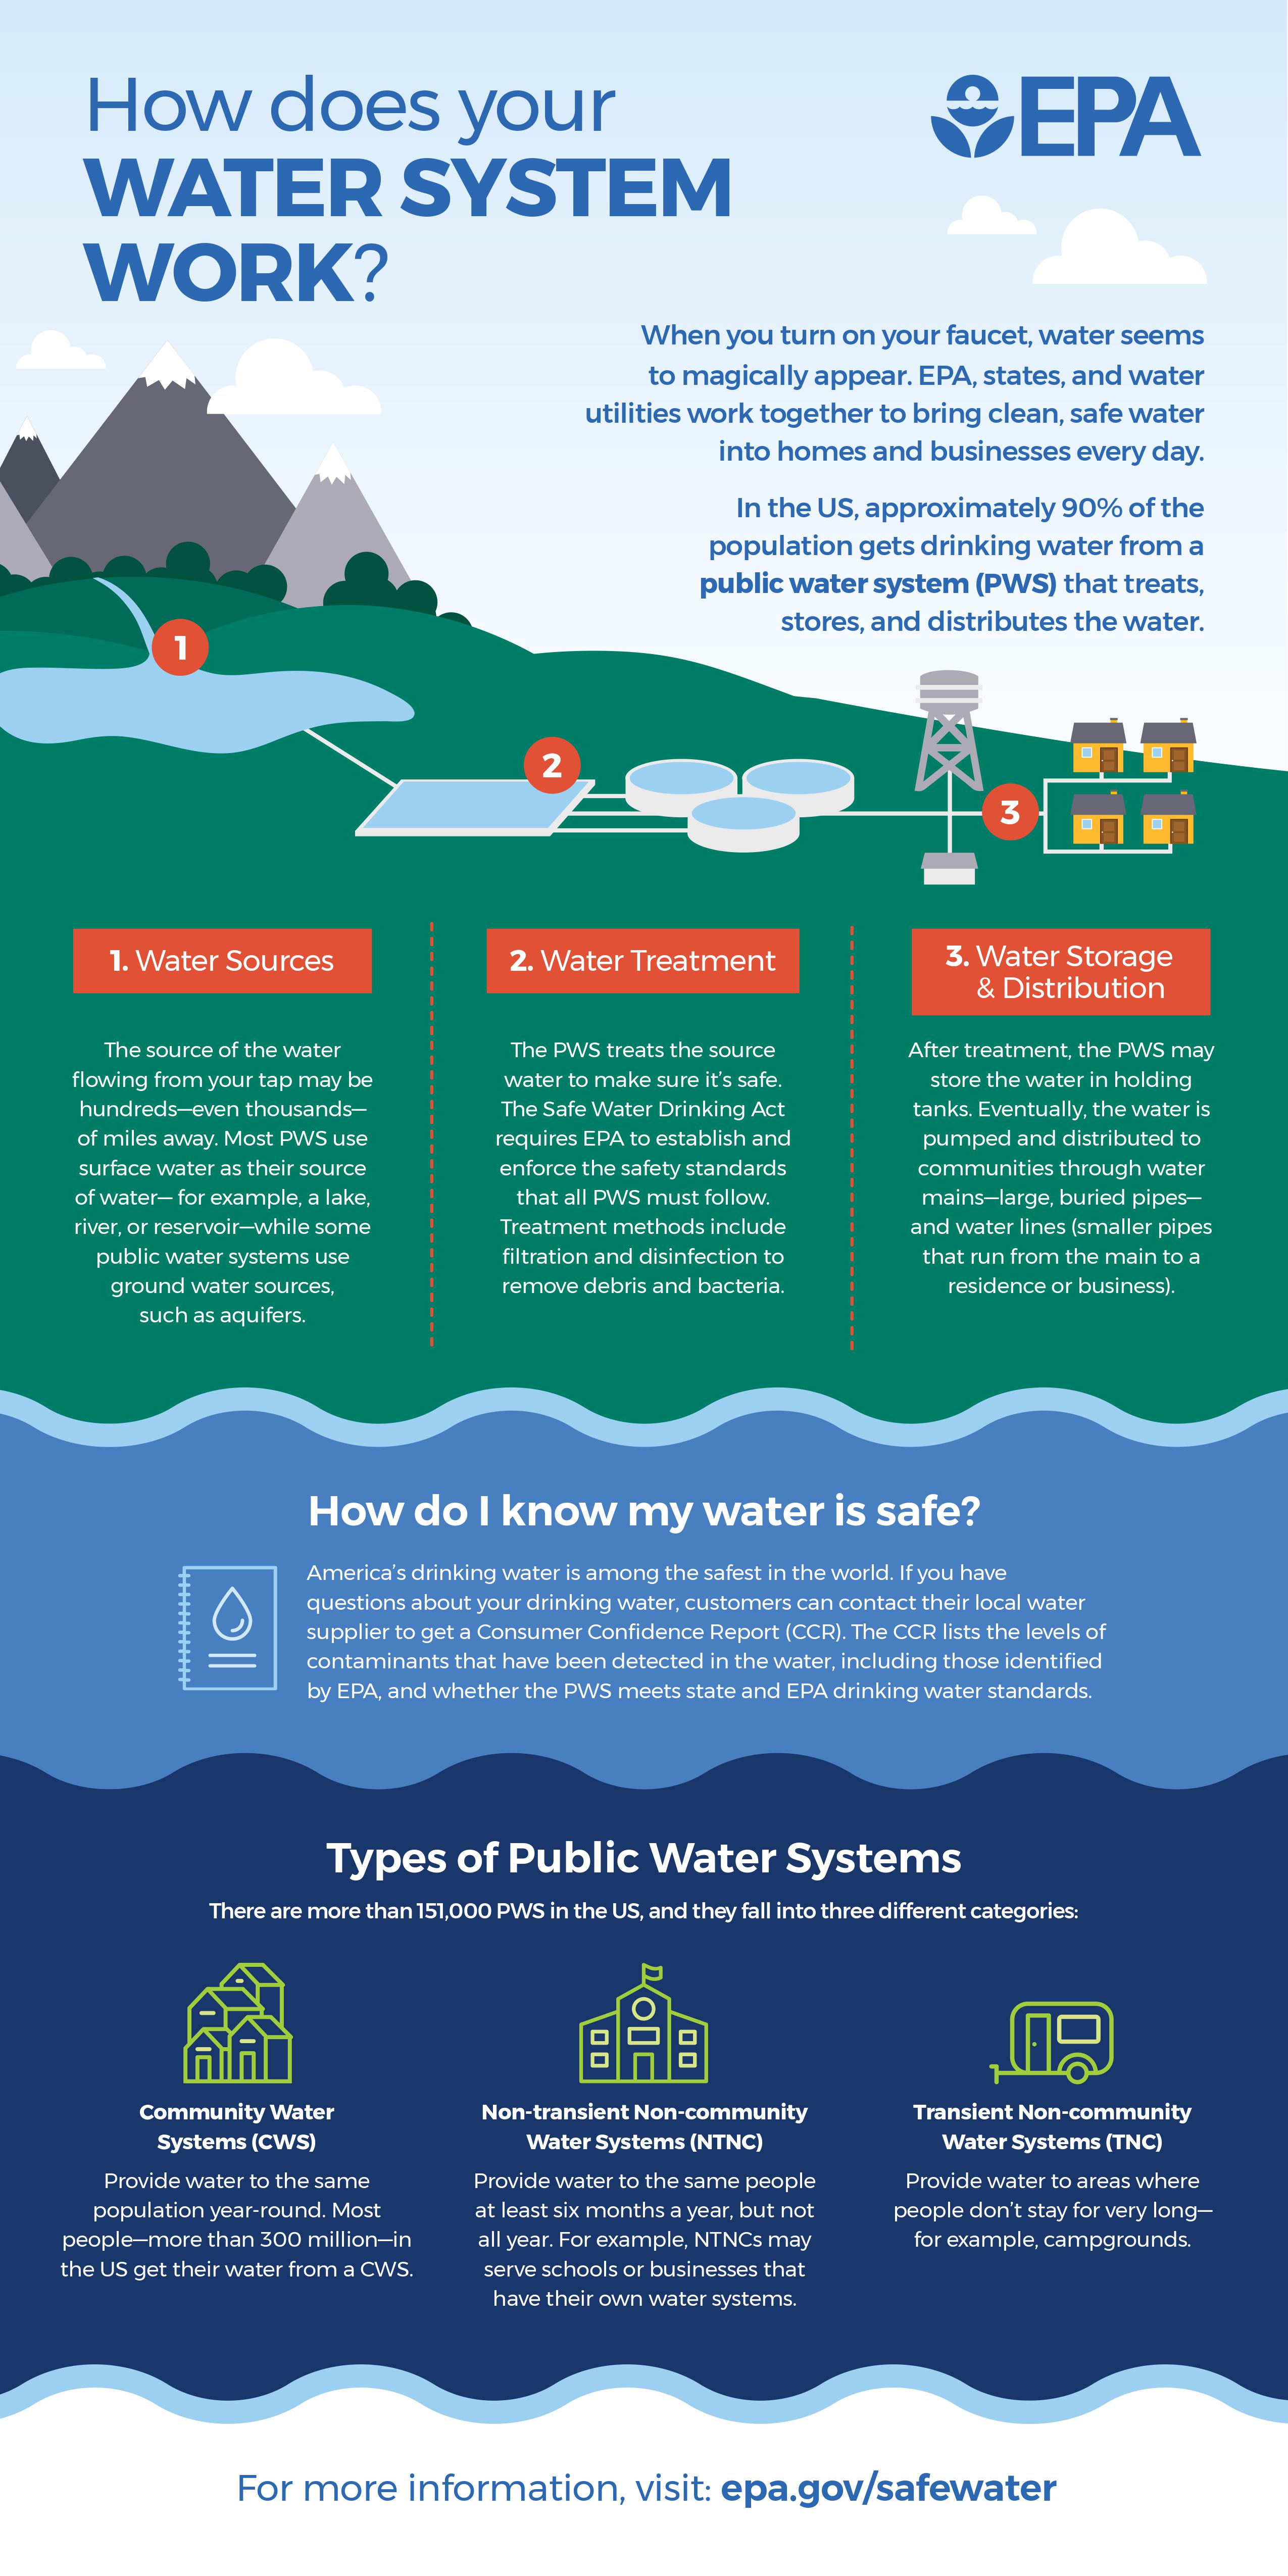 How does your water system work?